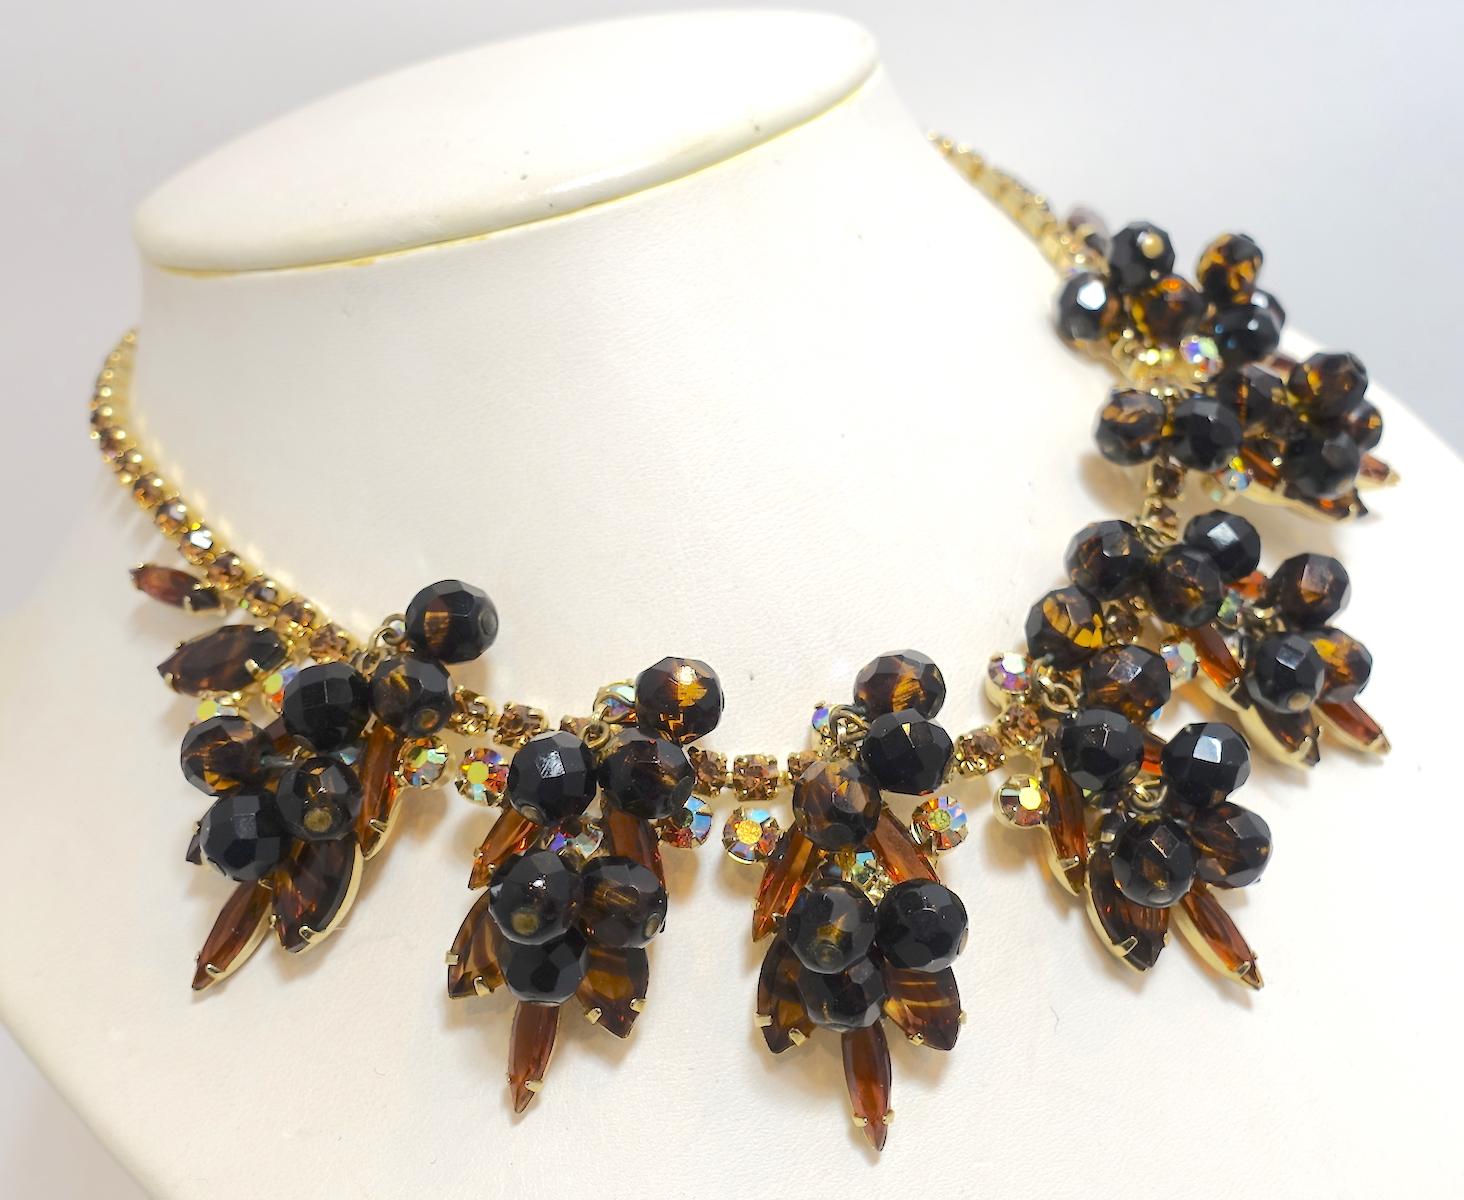 When I first saw this necklace, I thought it might be a Juliana. This vintage necklace features 6 topaz color rhinestones and marbleized bead accent drops in a gold tone setting. The necklace measures 15-1/2” and the drops are 2-1/8” with a hook